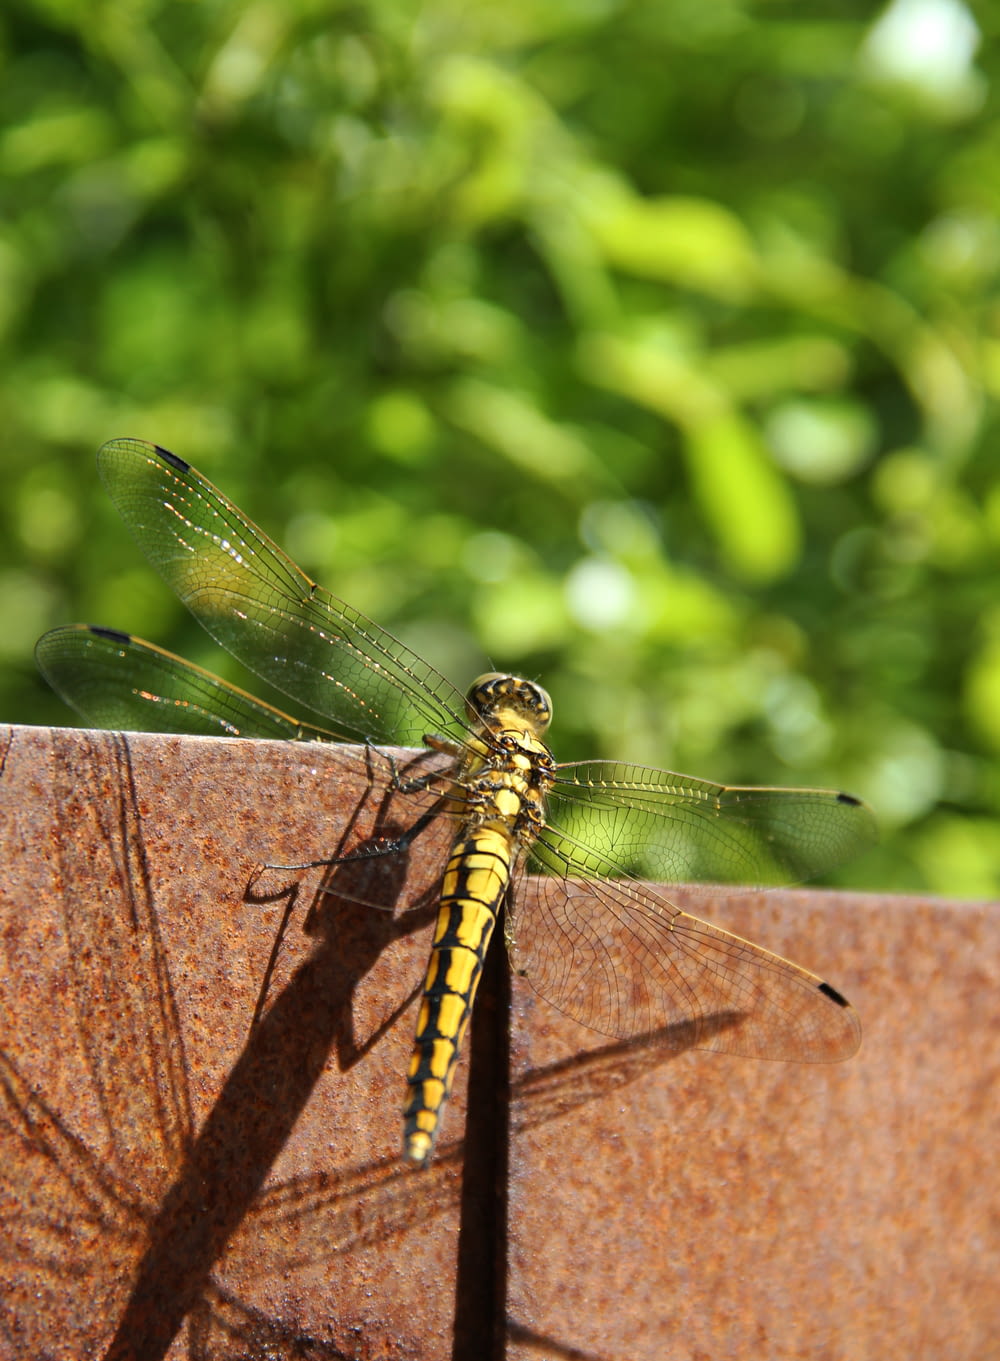 a yellow dragonfly sitting on top of a wooden surface